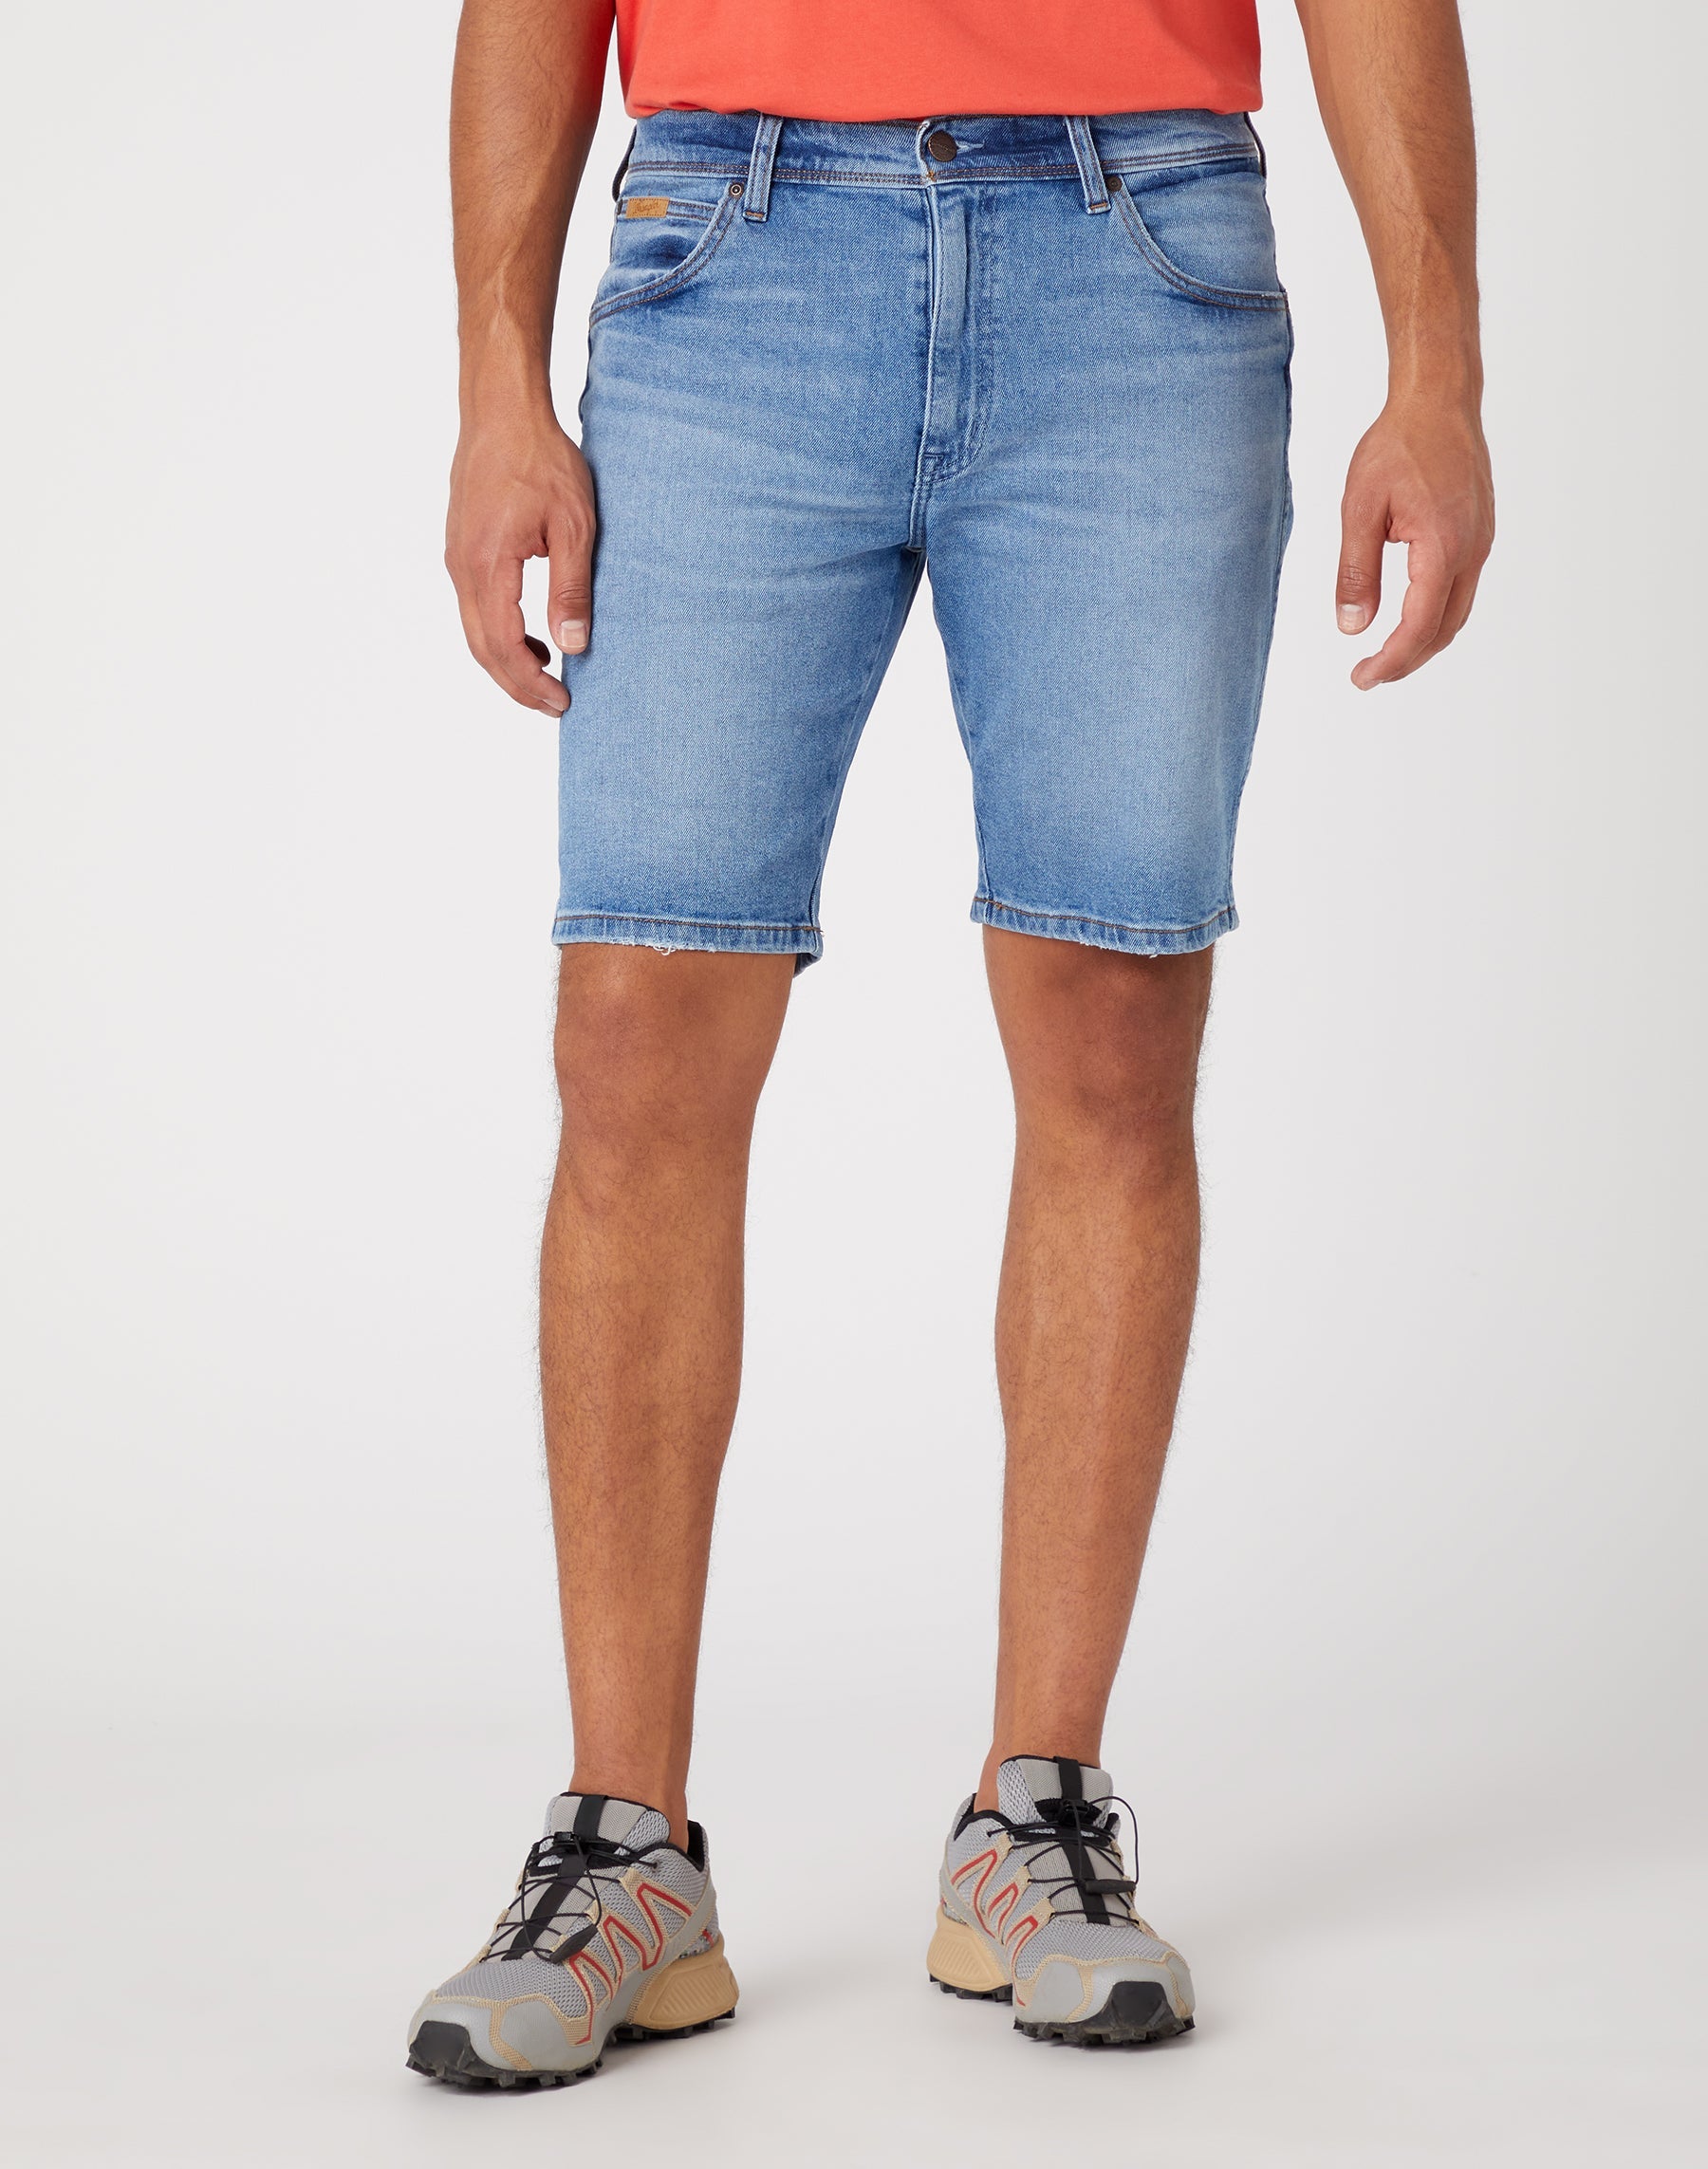 Texas Shorts in The Dude Jeansshorts Wrangler   